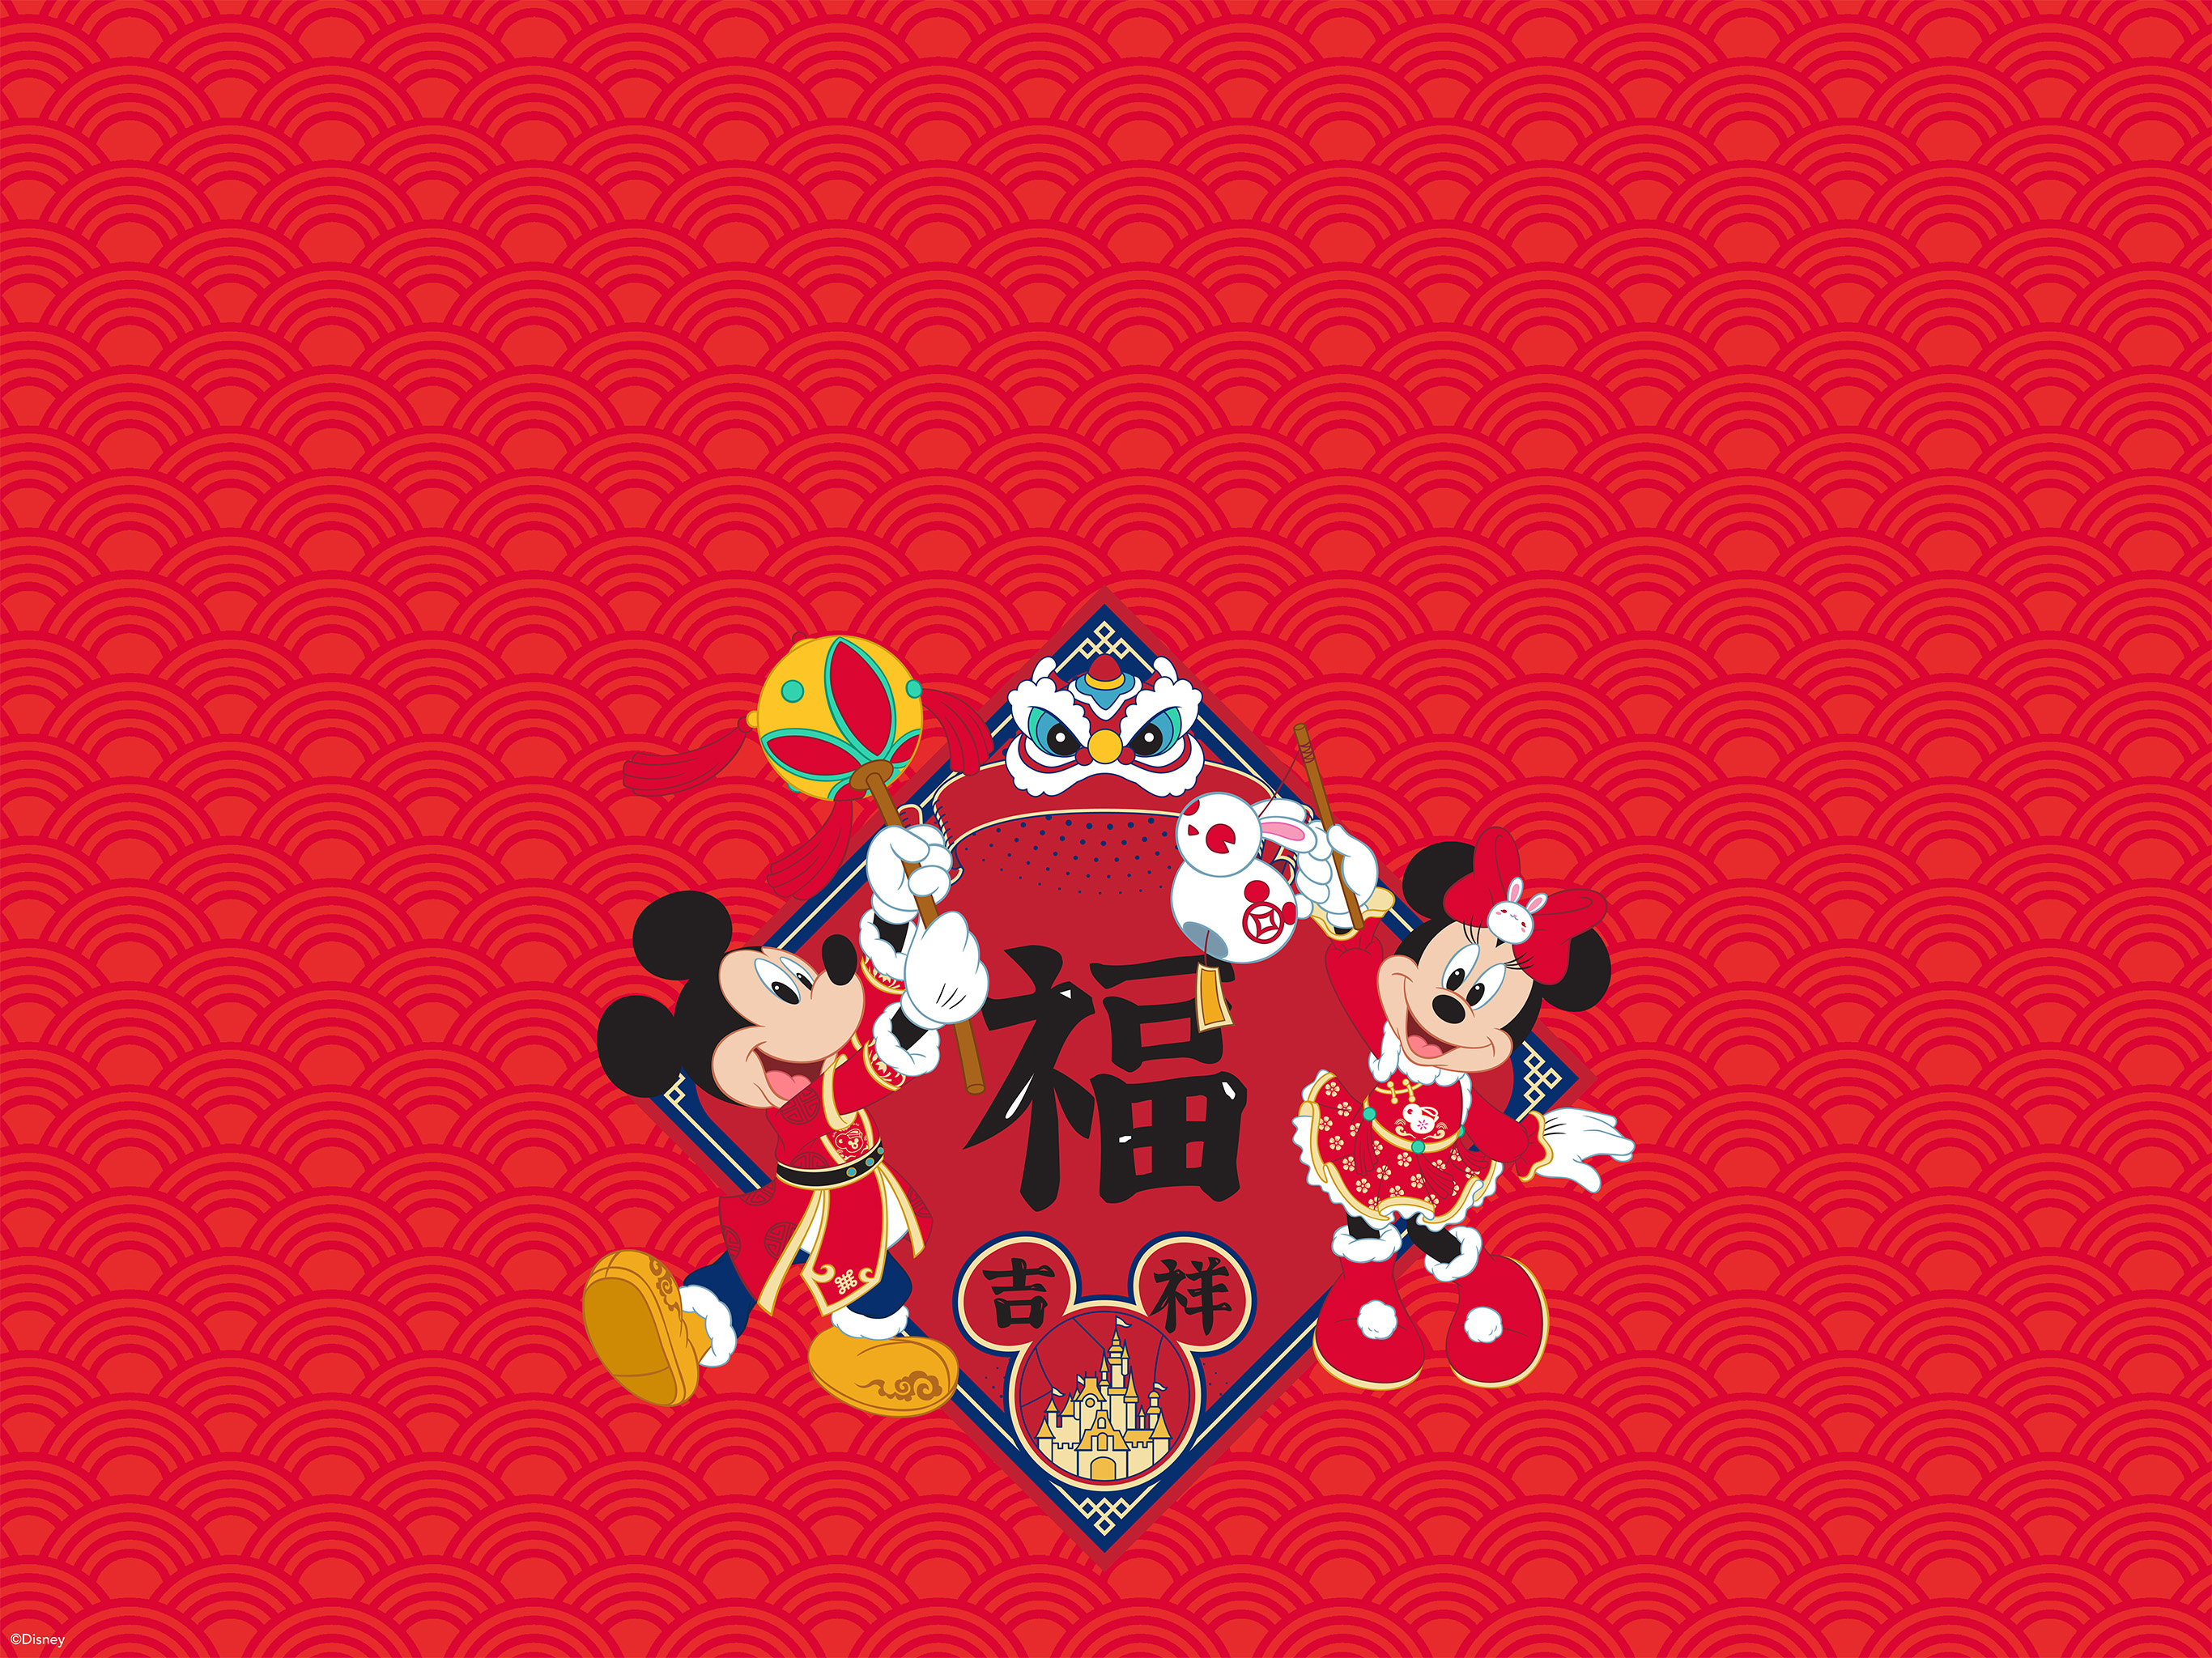 Happy Lunar New Year 2023 with Mickey Mouse and Minnie Mouse Wallpaper  -Desktop/iPad/Zoom Background | Disney Parks Blog